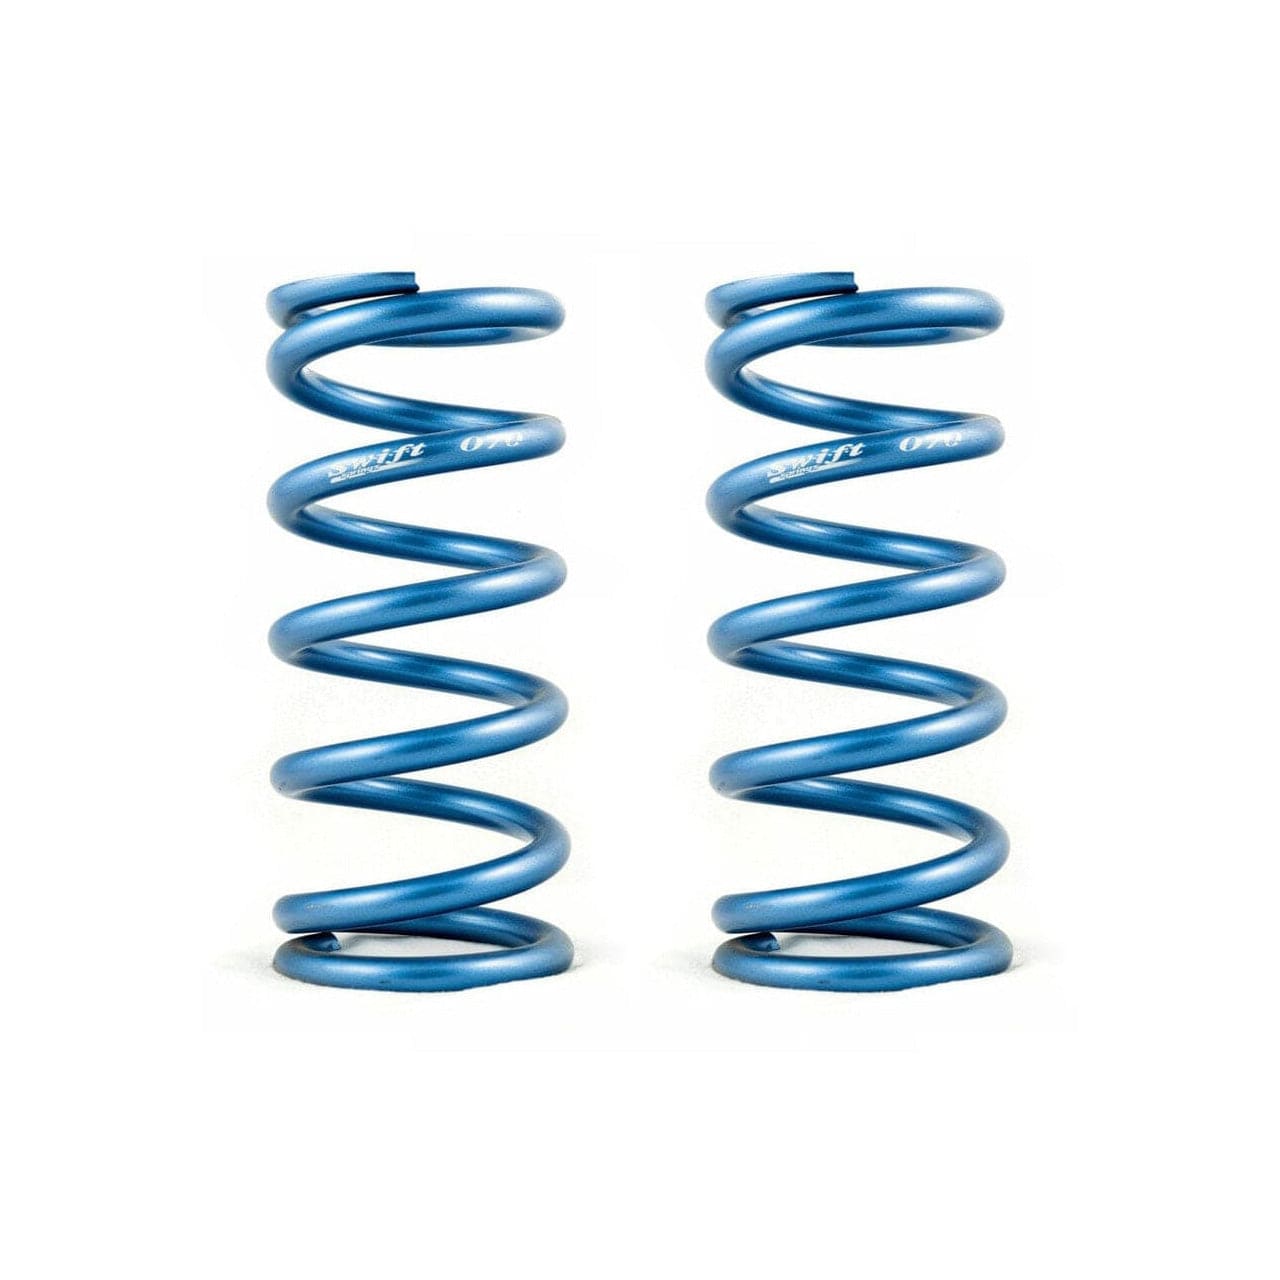 Swift Springs Metric Coilover Springs - ID 60mm, 5" Length